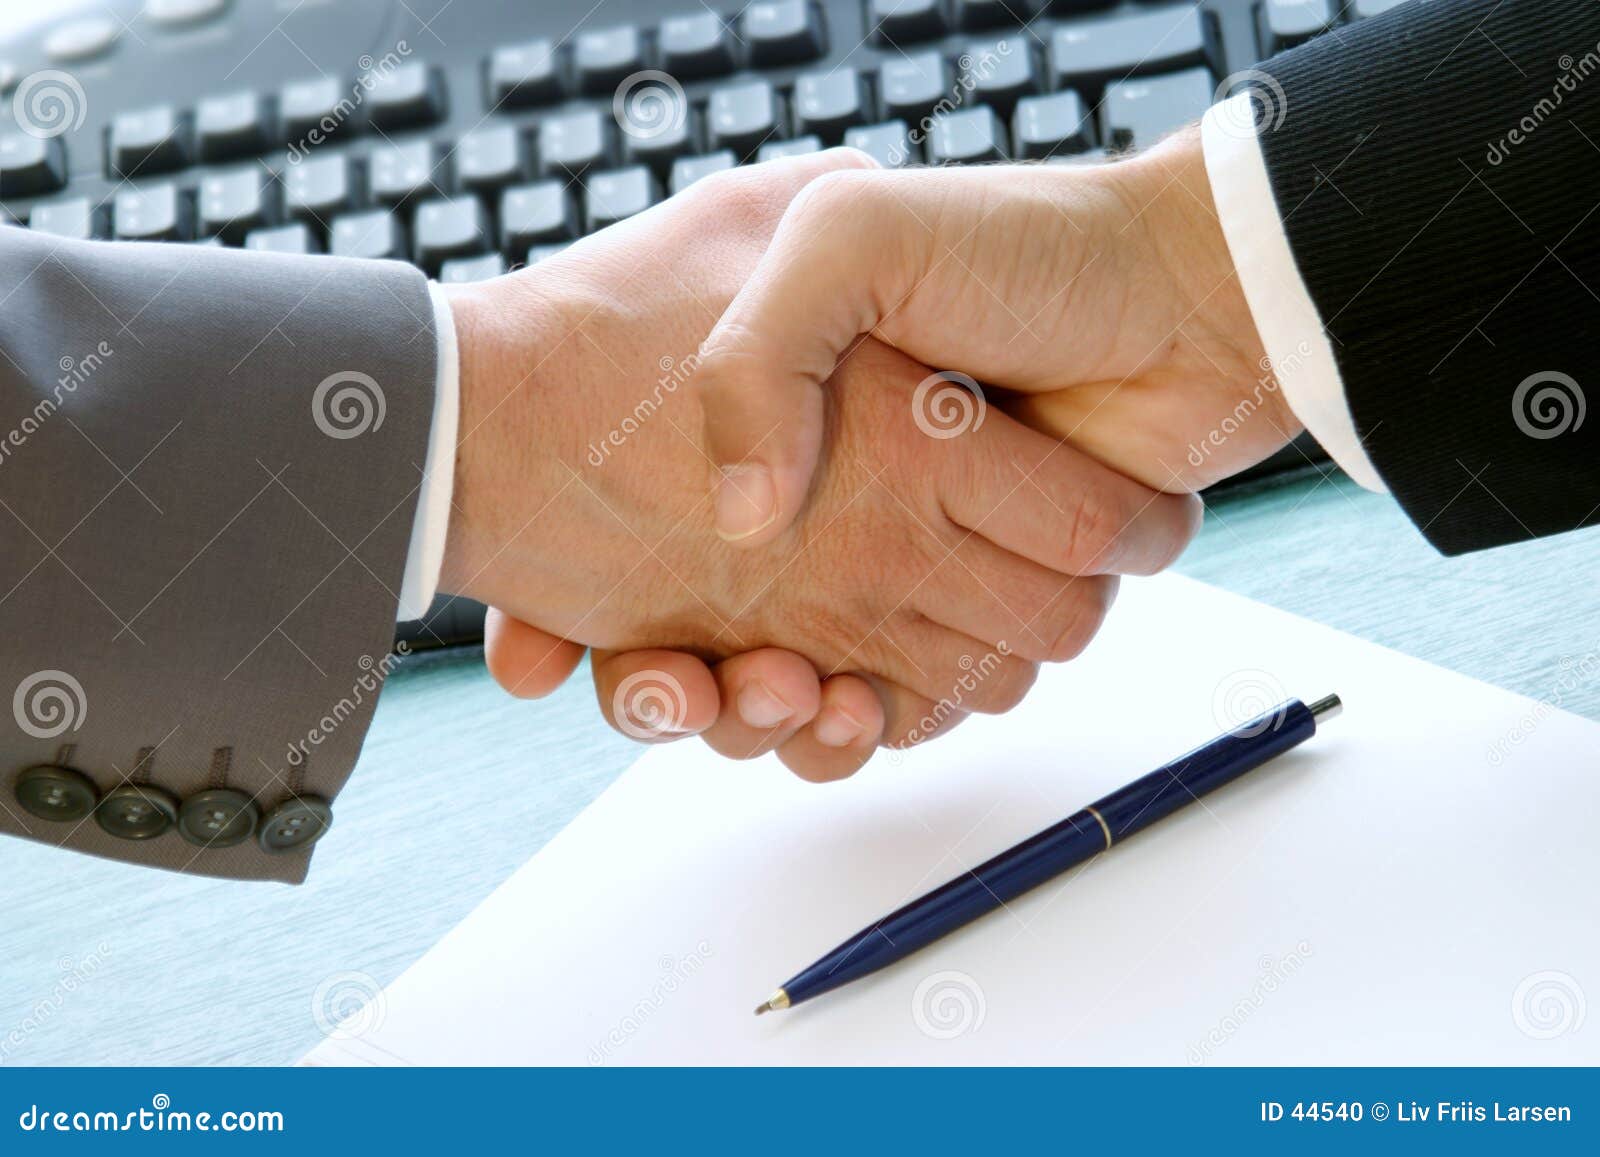  done stock photo. Image of contract, company, customer - 44540